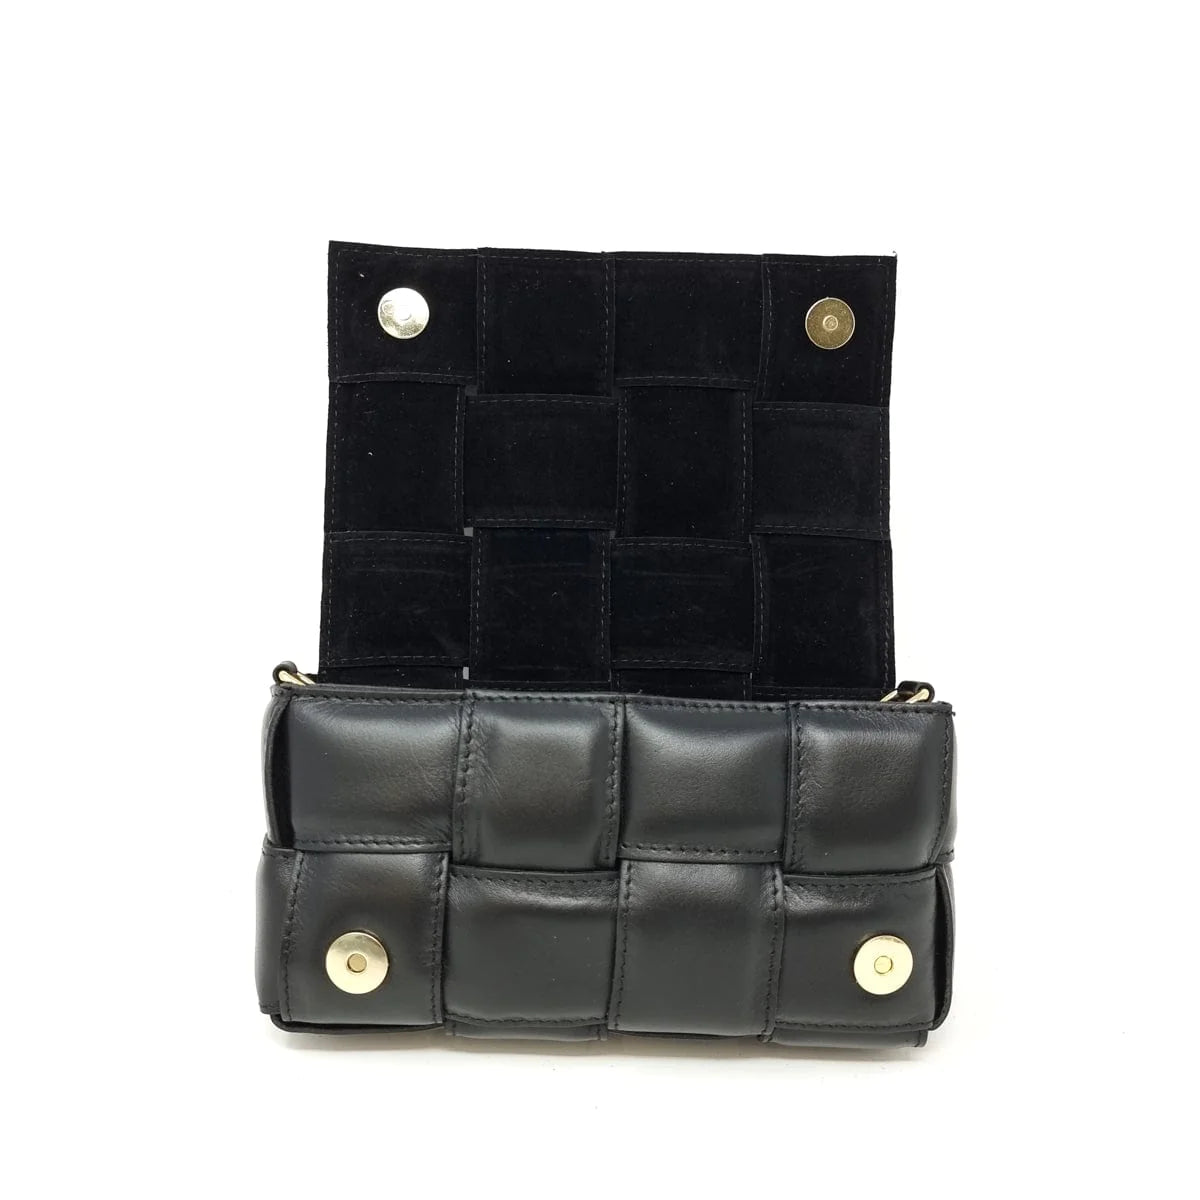 Small Black Quilted Bag